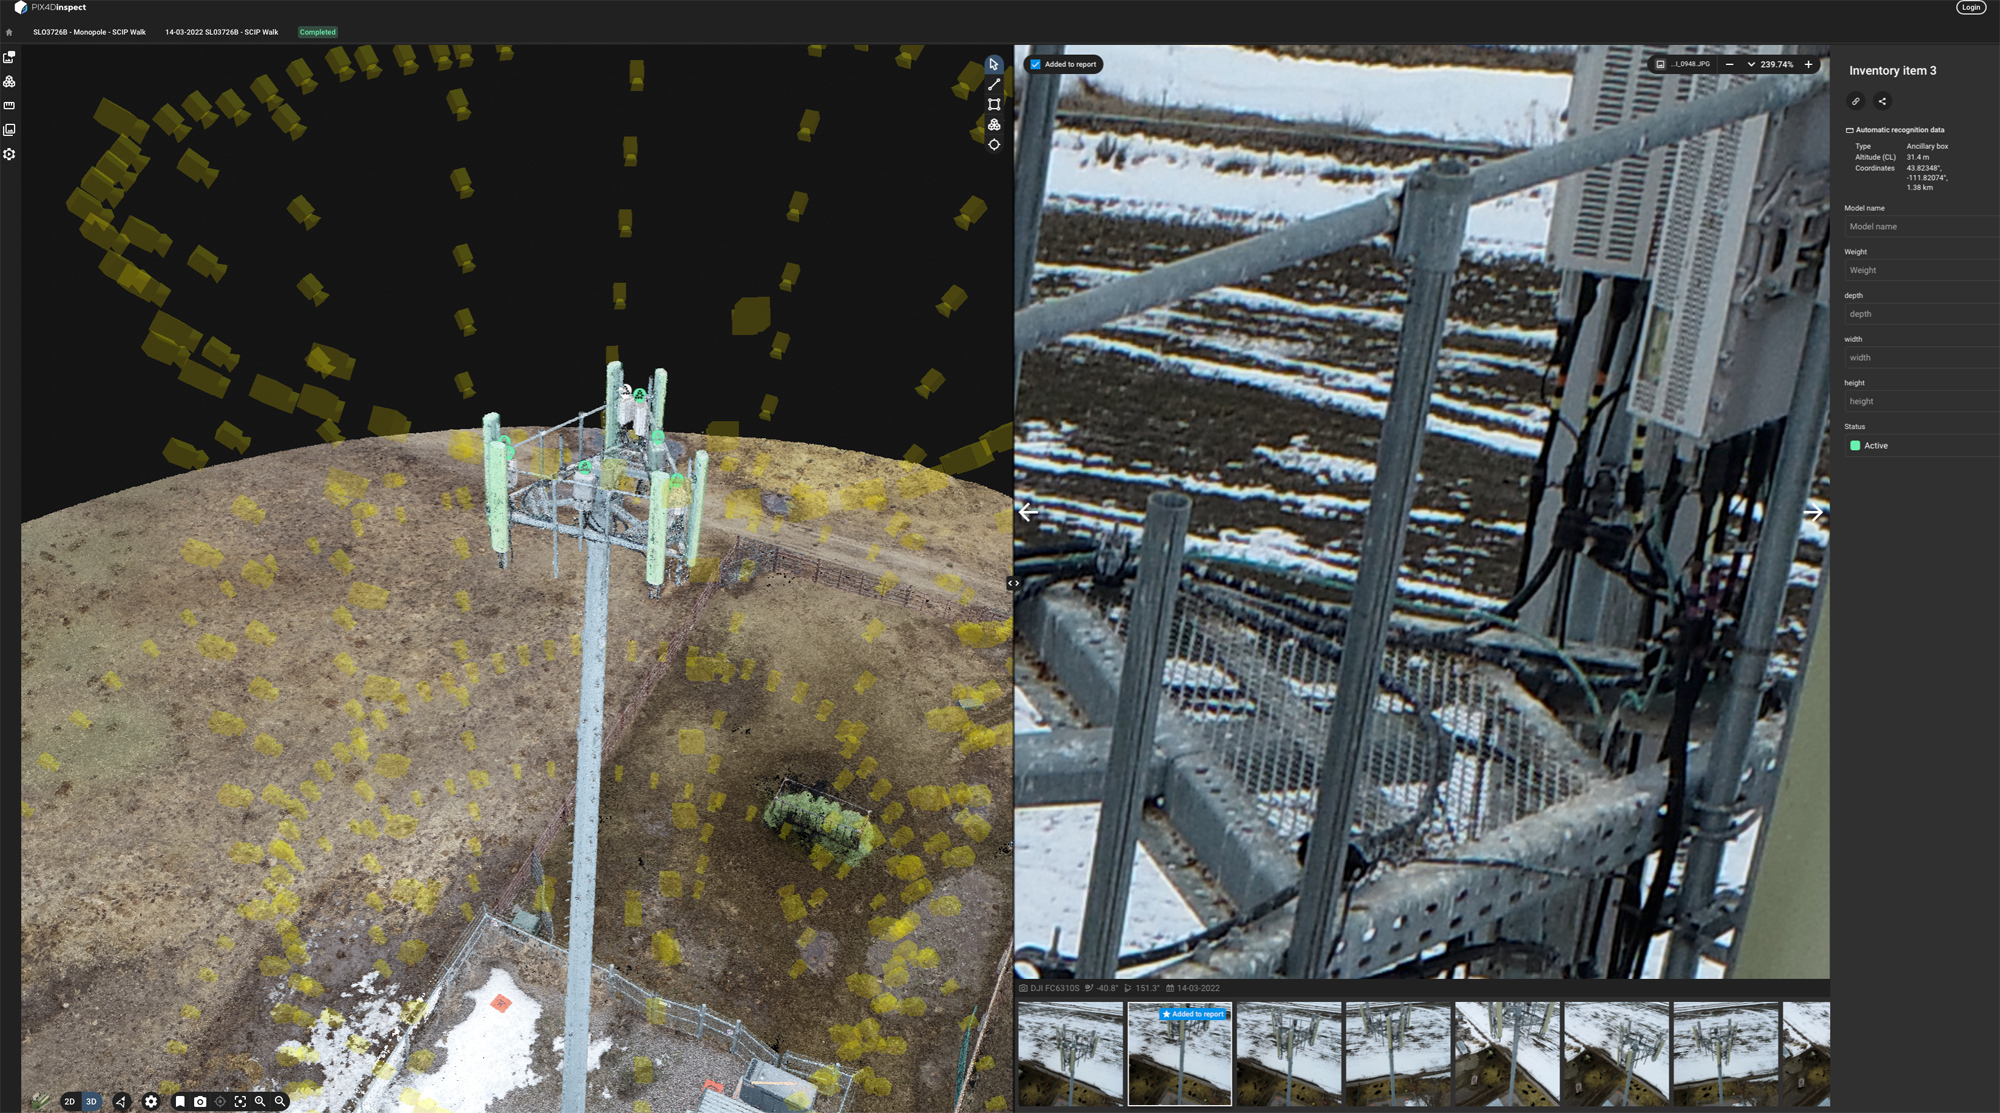 This is one of his projects where he does exterior 3D mapping of cell phone towers